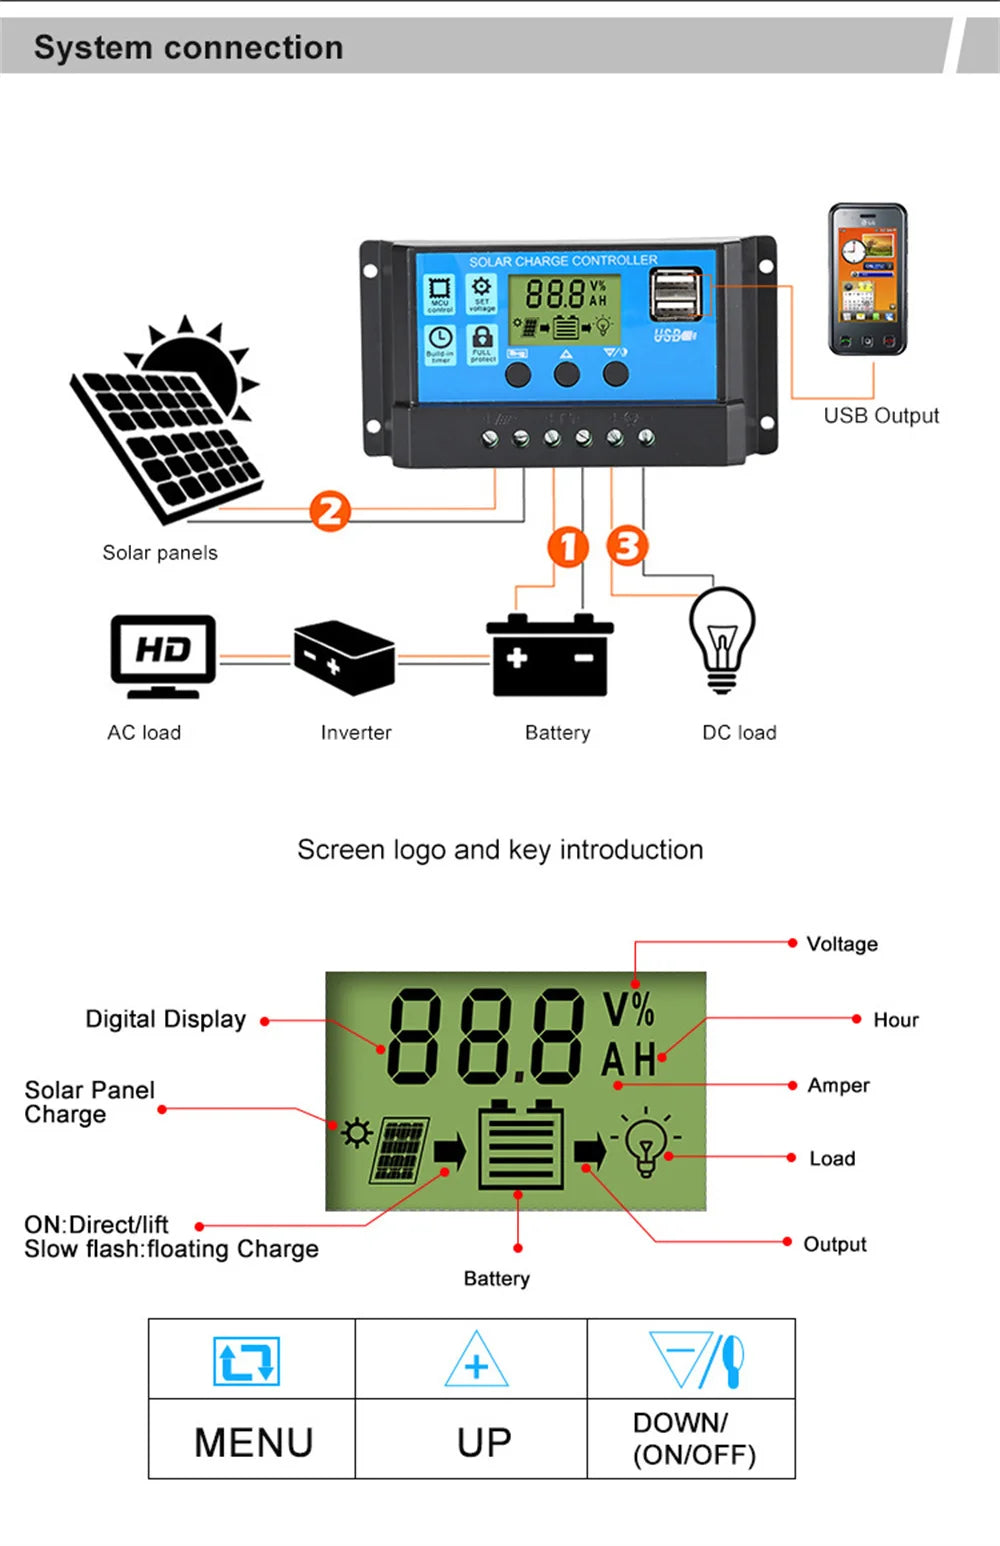 Upgraded 10A 20A 30A Solar Controller, Upgraded solar controller with 10A/20A/30A PV regulator, auto charging, LCD display, and USB output.